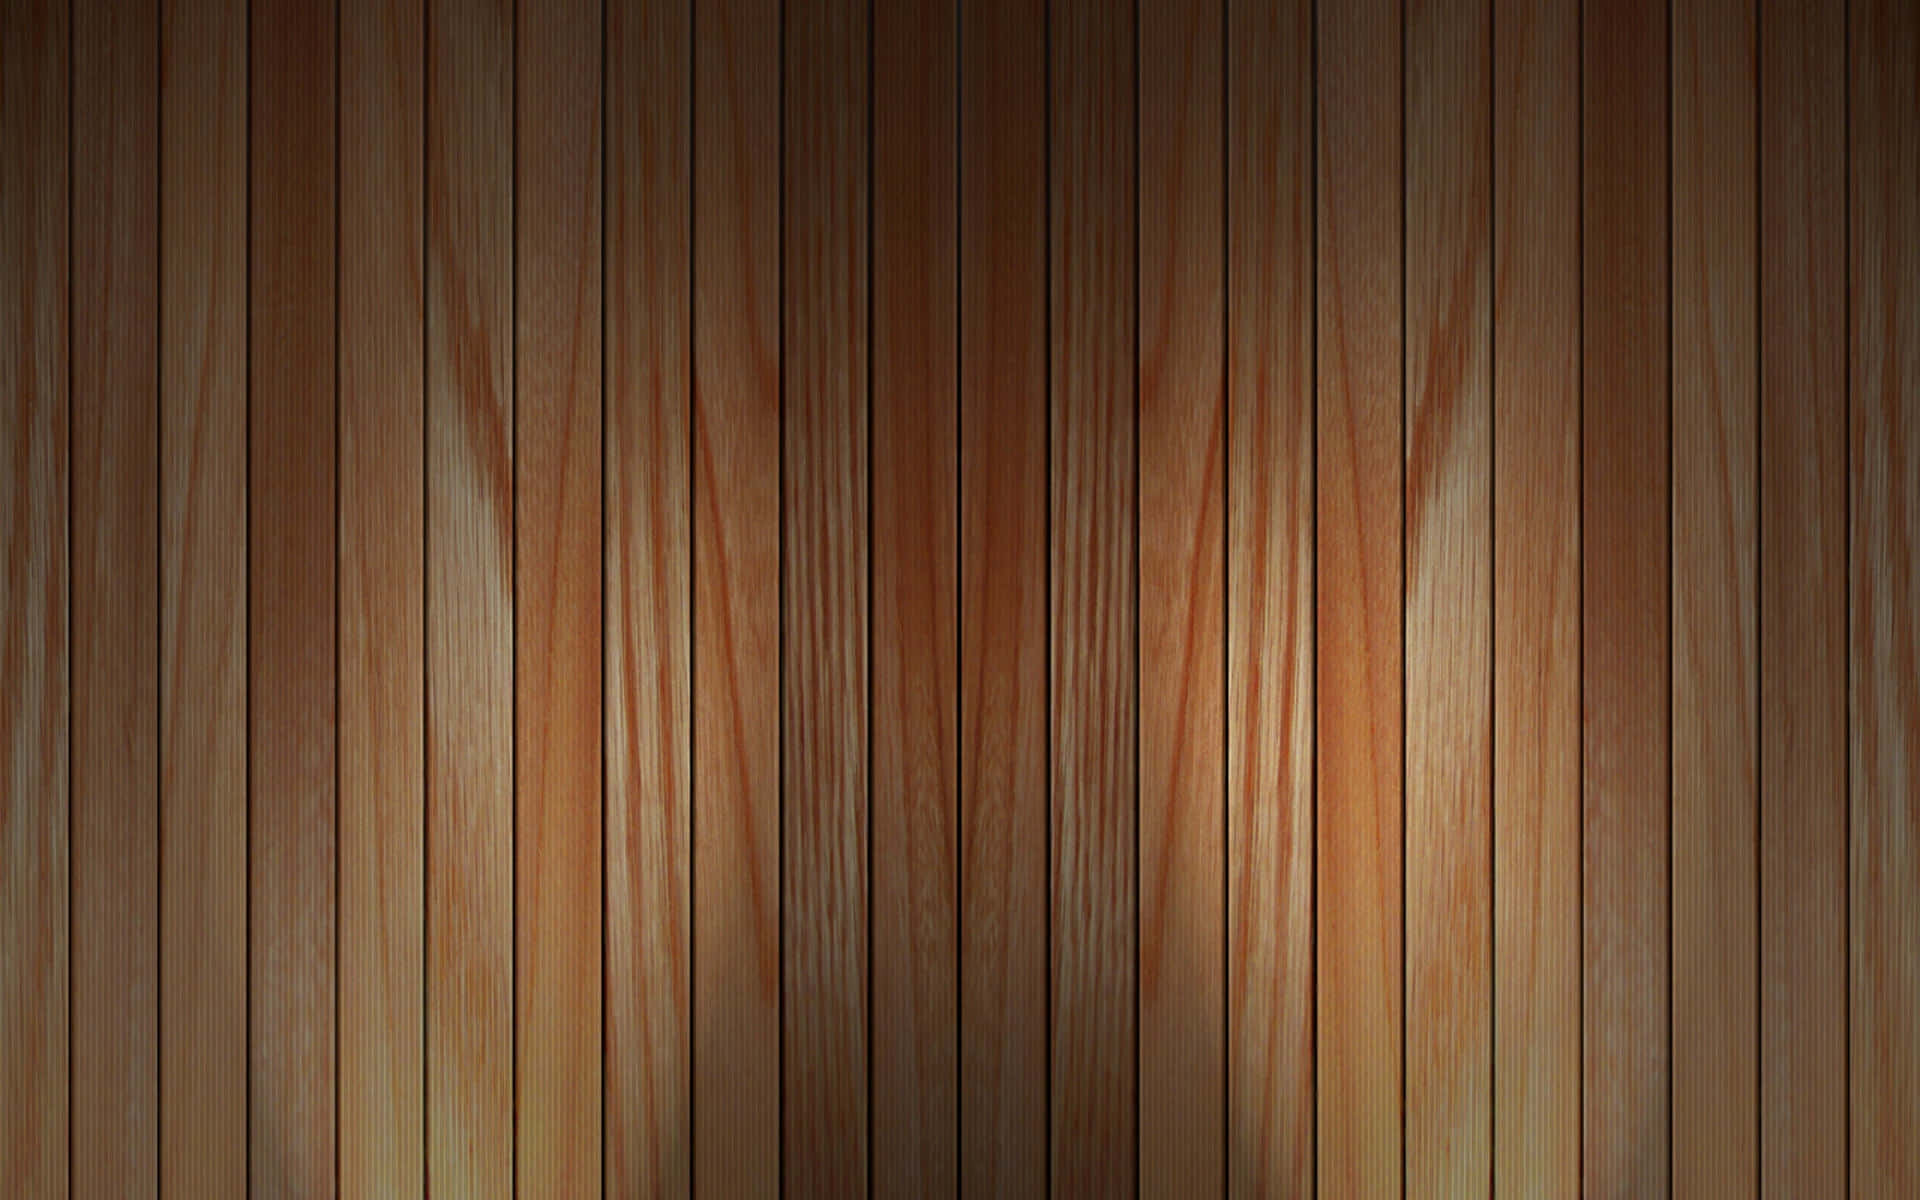 Caption: Rustic Elegance: Authentic Wooden Background Wallpaper